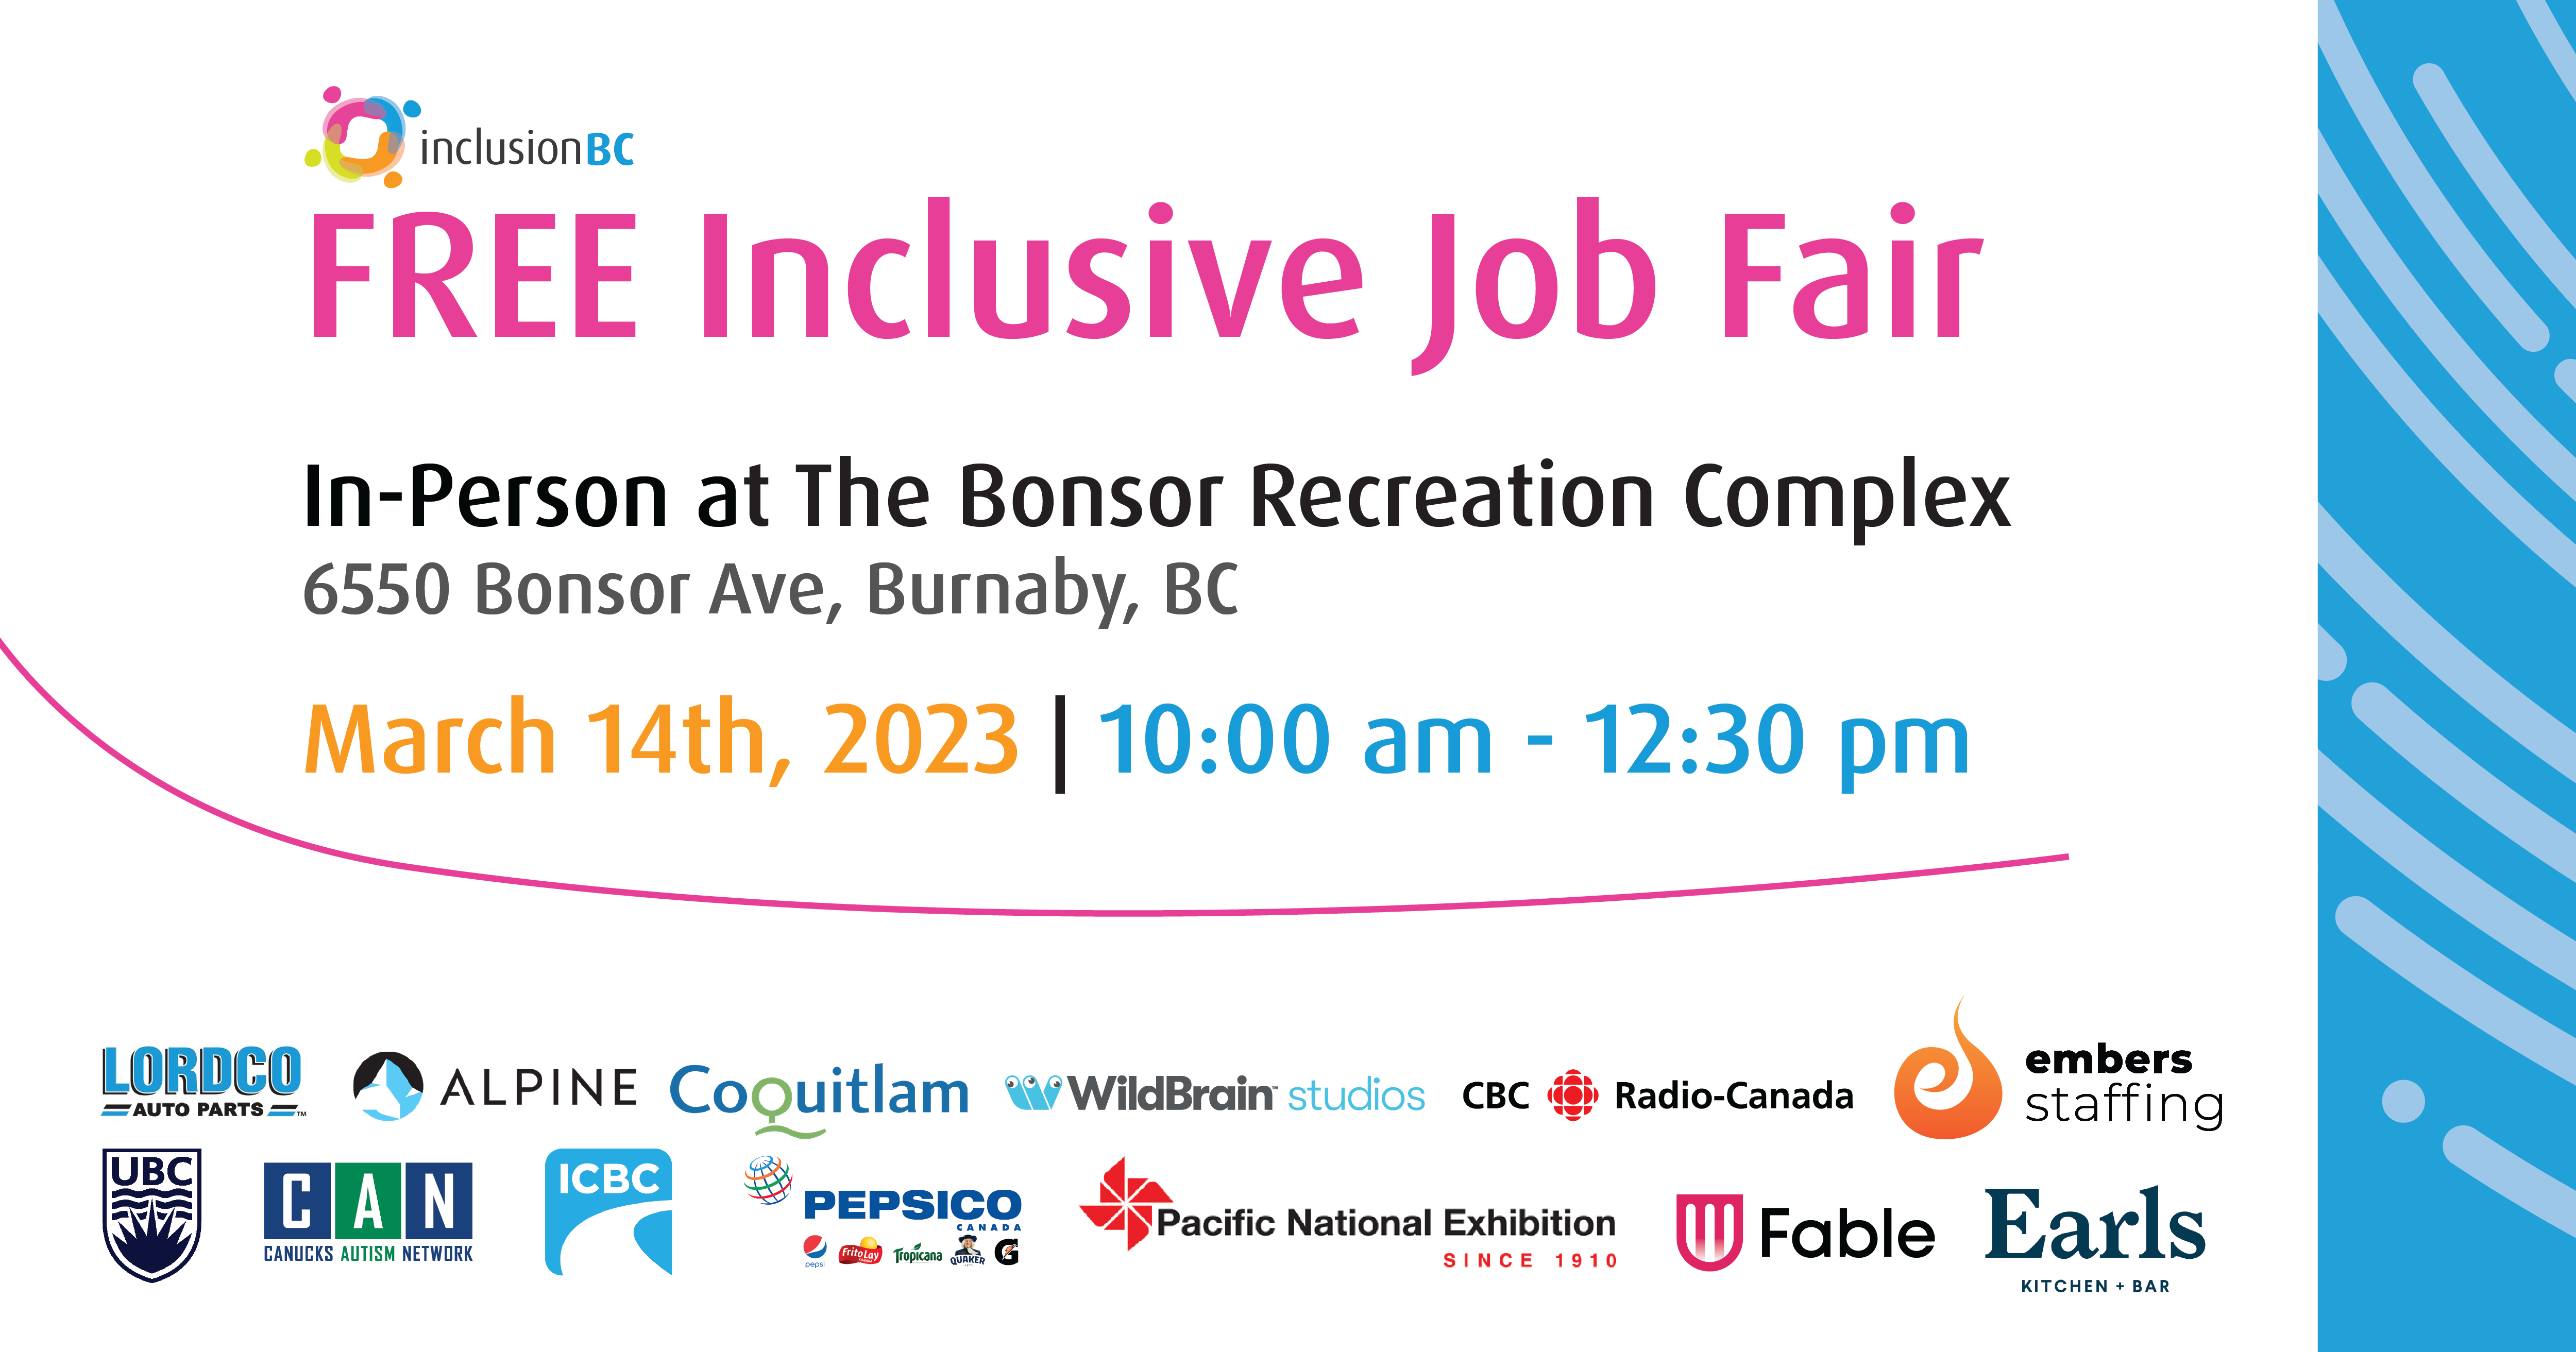 FREE Inclusive Job Fair In-Person at 6550 Bonsor Ave, Burnaby, BC March 14th, 2023 10:00 am- 12:30 pm